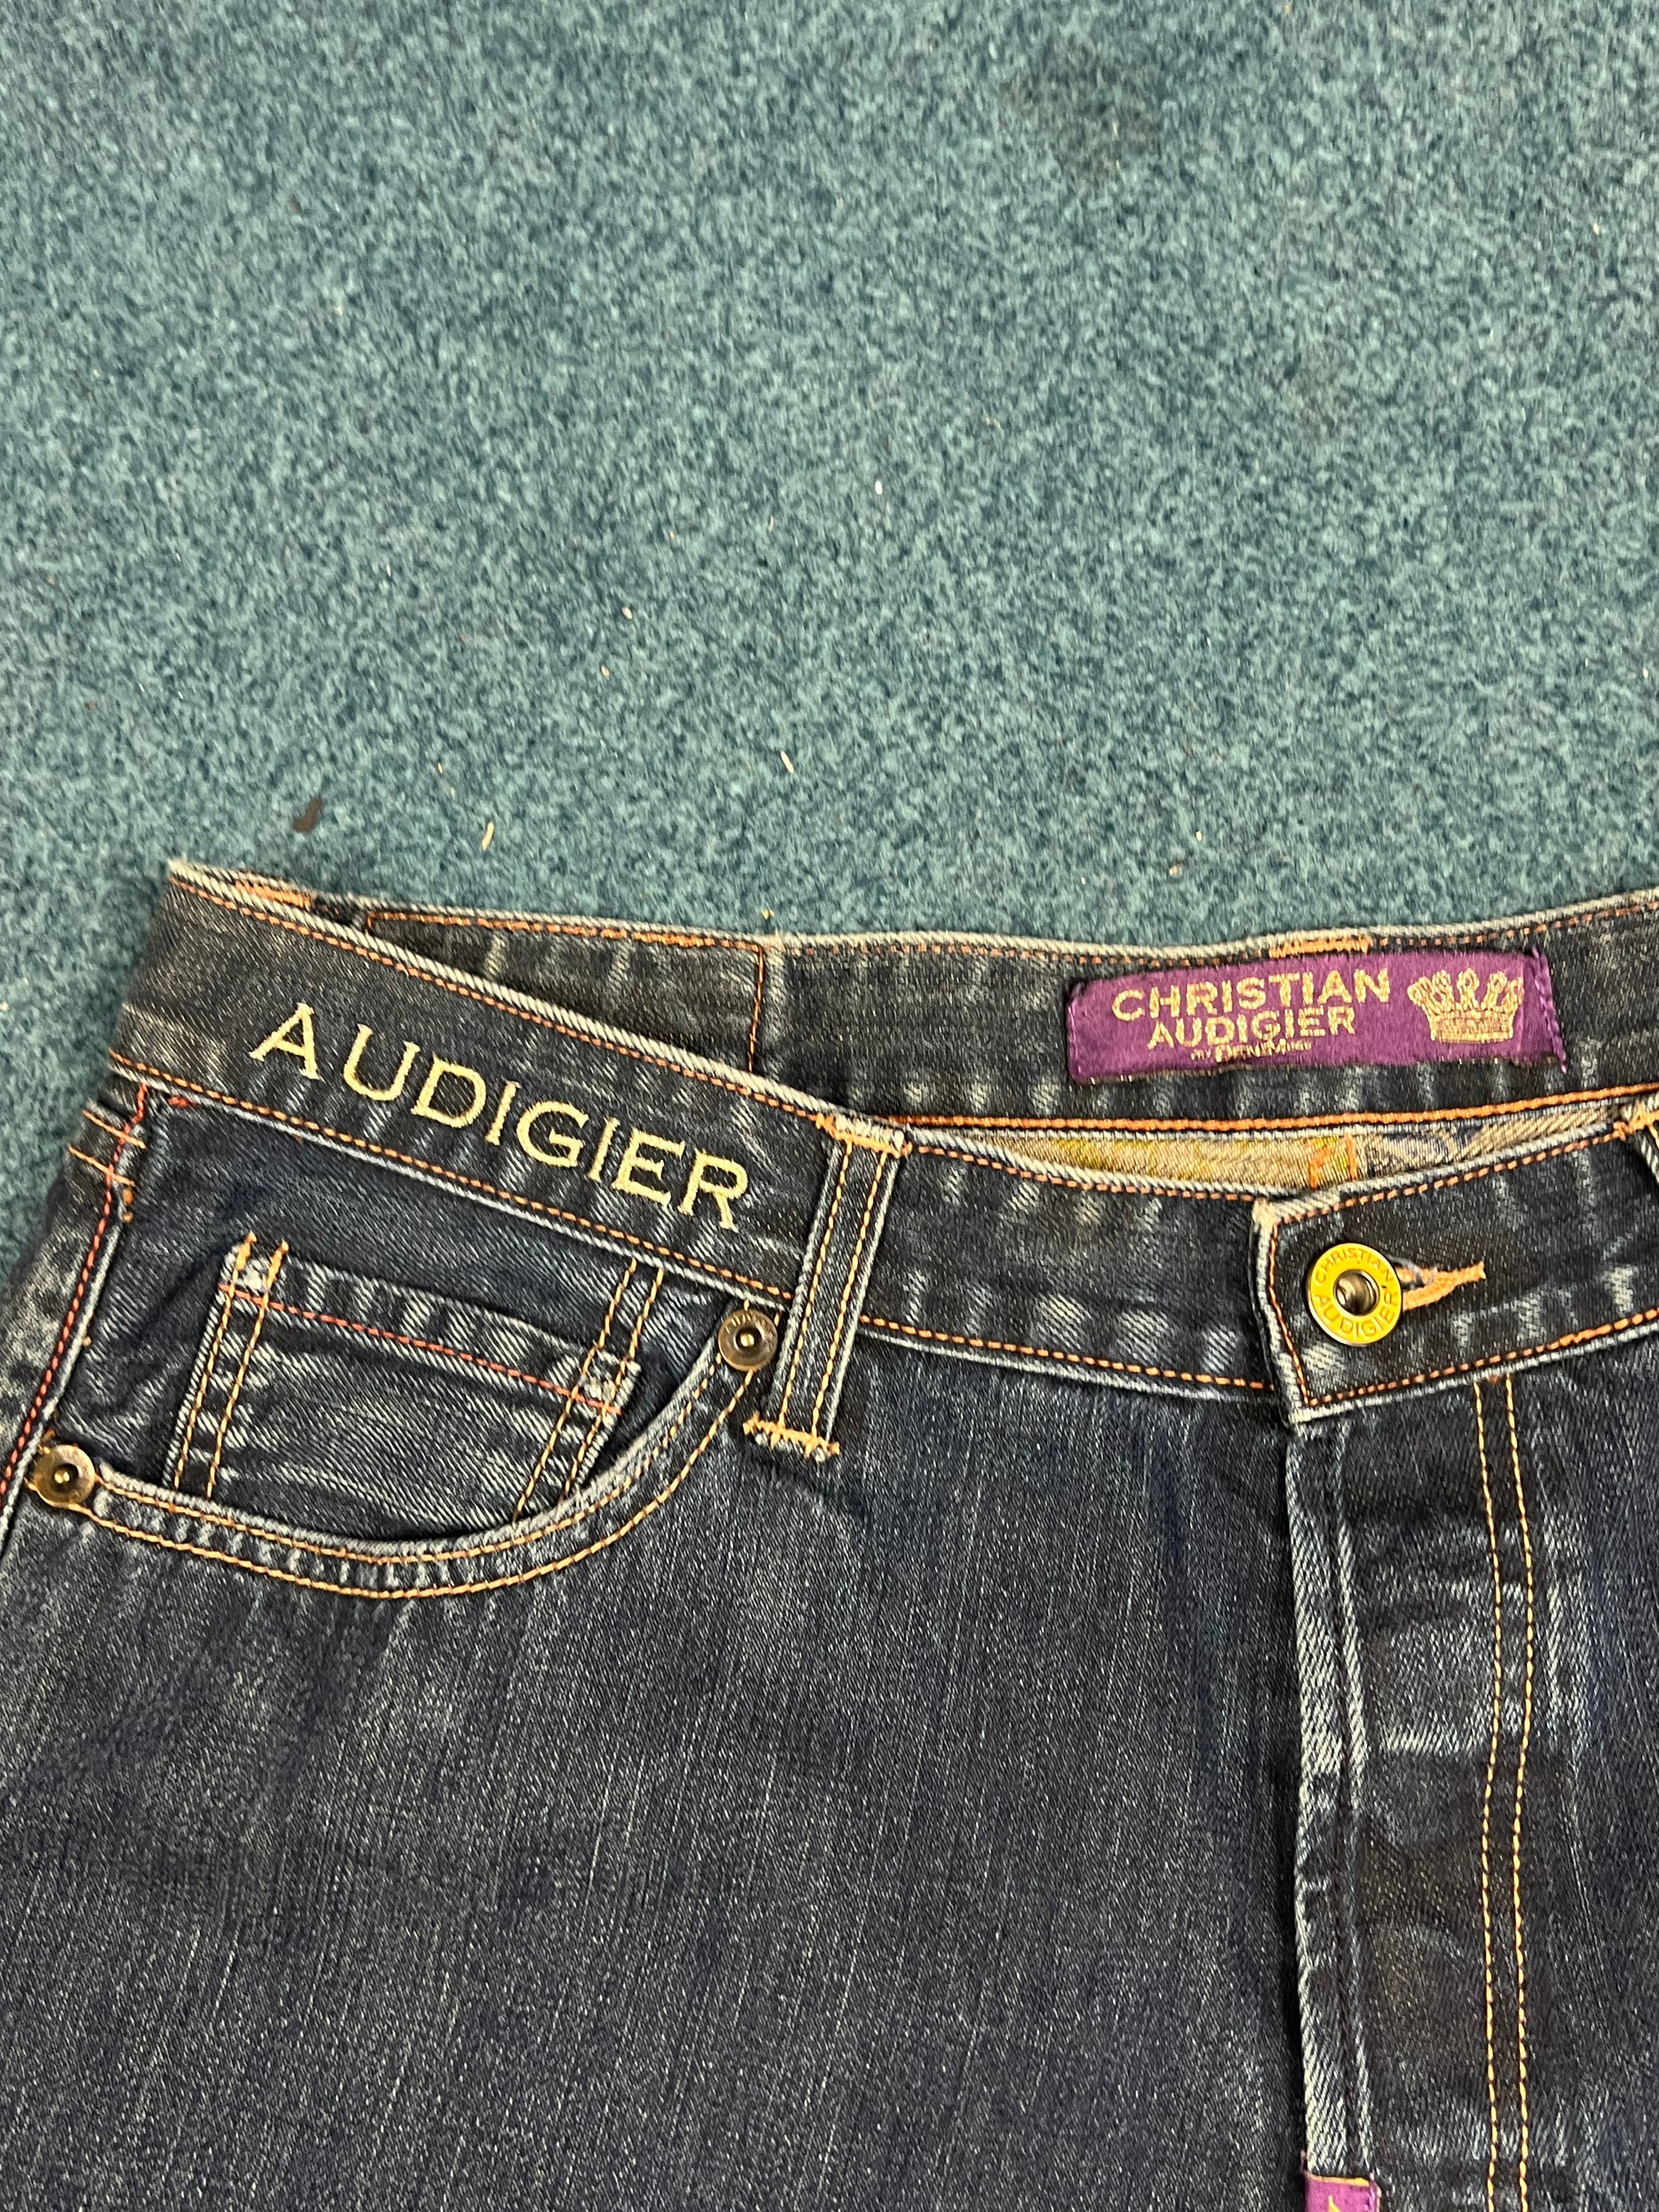 Early 2000s Christian Audigier Liberty Statue (not Ed Hardy) Flared Denim Trousers (34)